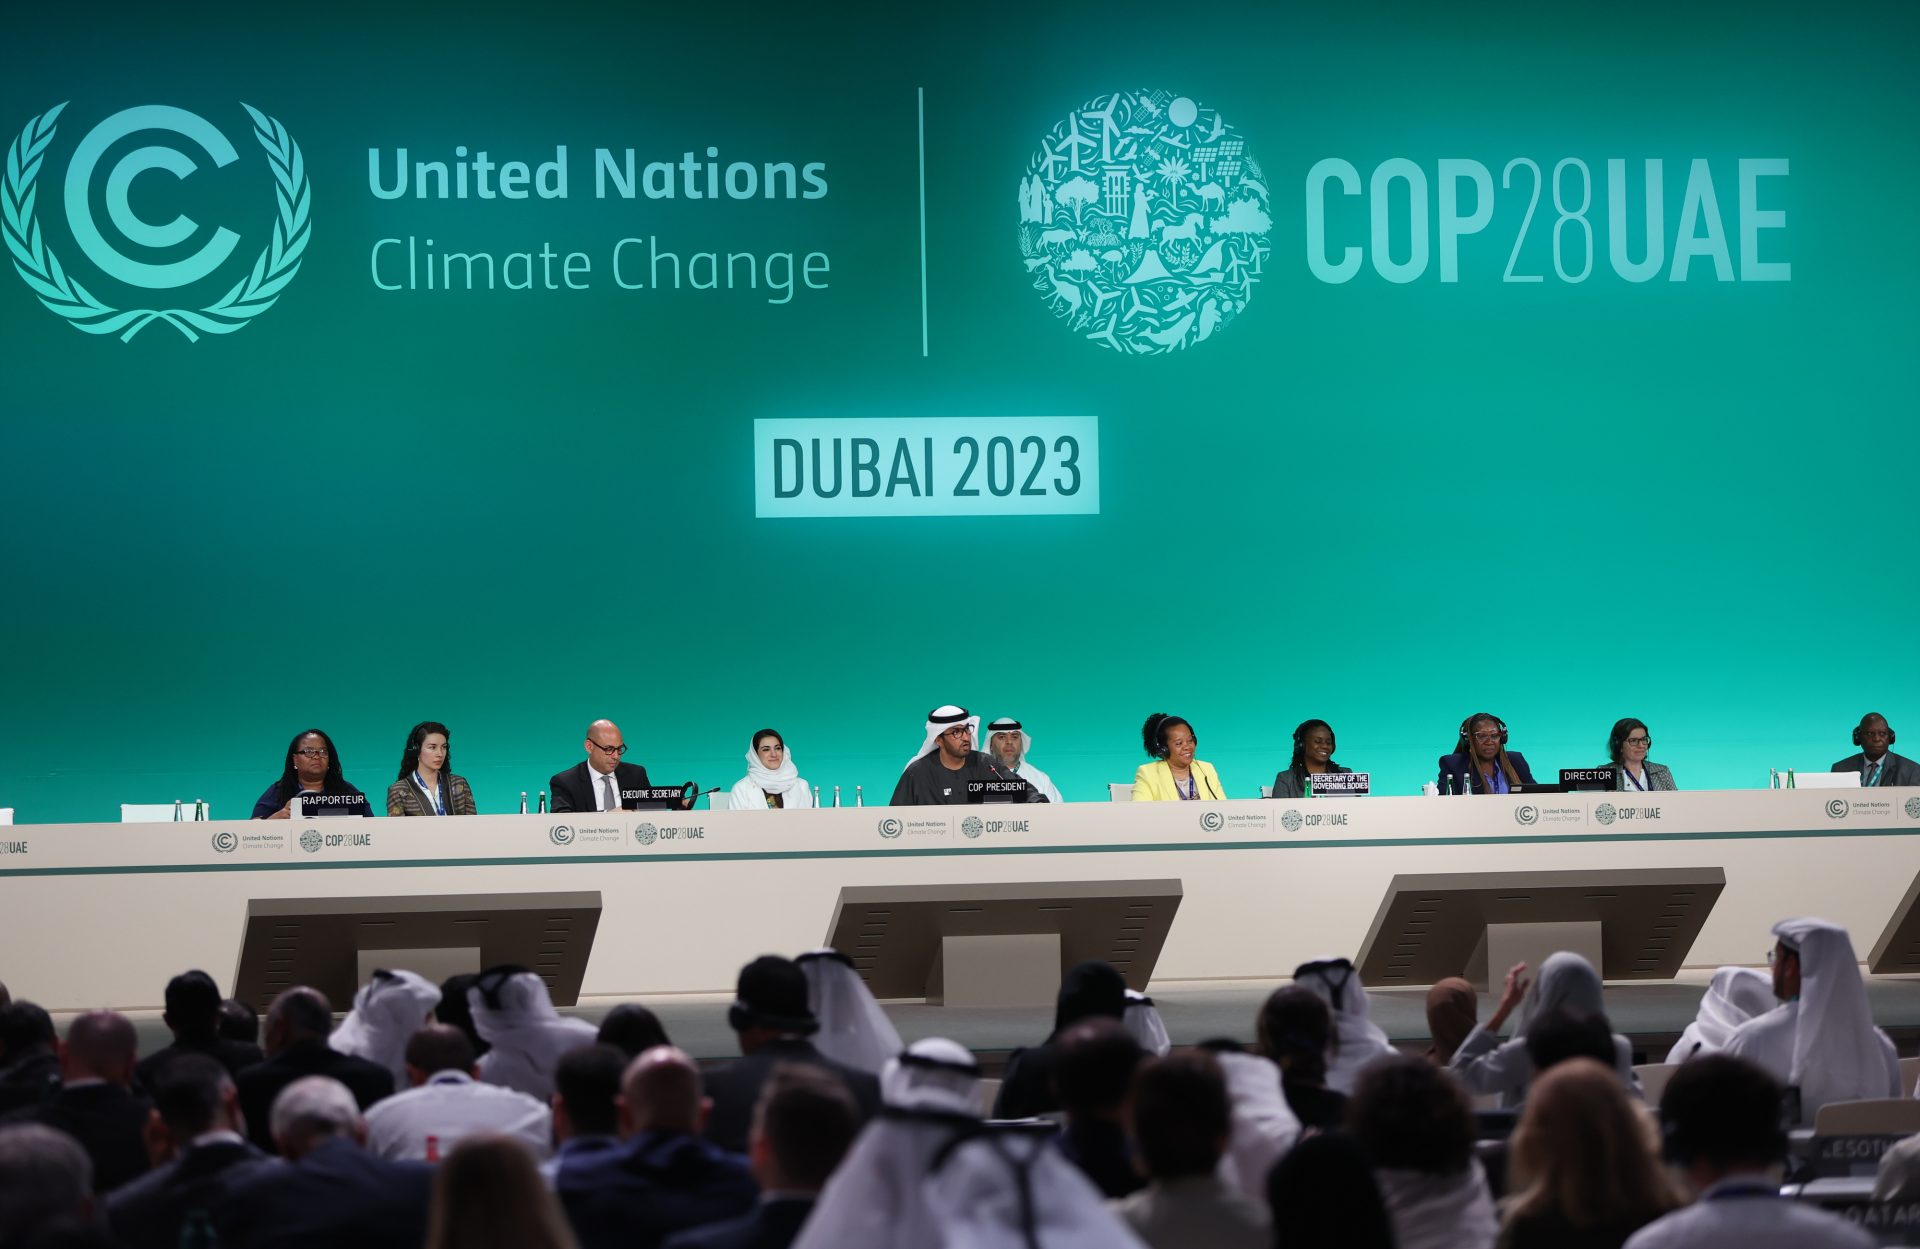 Dubai (United Arab Emirates), 11/12/2023.- President of COP28 and UAE's Minister for Industry and Advanced Technology Dr. Sultan Ahmed Al Jaber (C) attends a session of the 2023 United Nations Climate Change Conference (COP28), in Dubai, United Arab Emirates, 11 December 2023. The 2023 United Nations Climate Change Conference (COP28), runs from 30 November to 12 December, and is expected to host one of the largest number of participants in the annual global climate conference as over 70,000 estimated attendees, including the member states of the UN Framework Convention on Climate Change (UNFCCC), business leaders, young people, climate scientists, Indigenous Peoples and other relevant stakeholders will attend. (Emiratos Árabes Unidos) EFE/EPA/ALI HAIDER